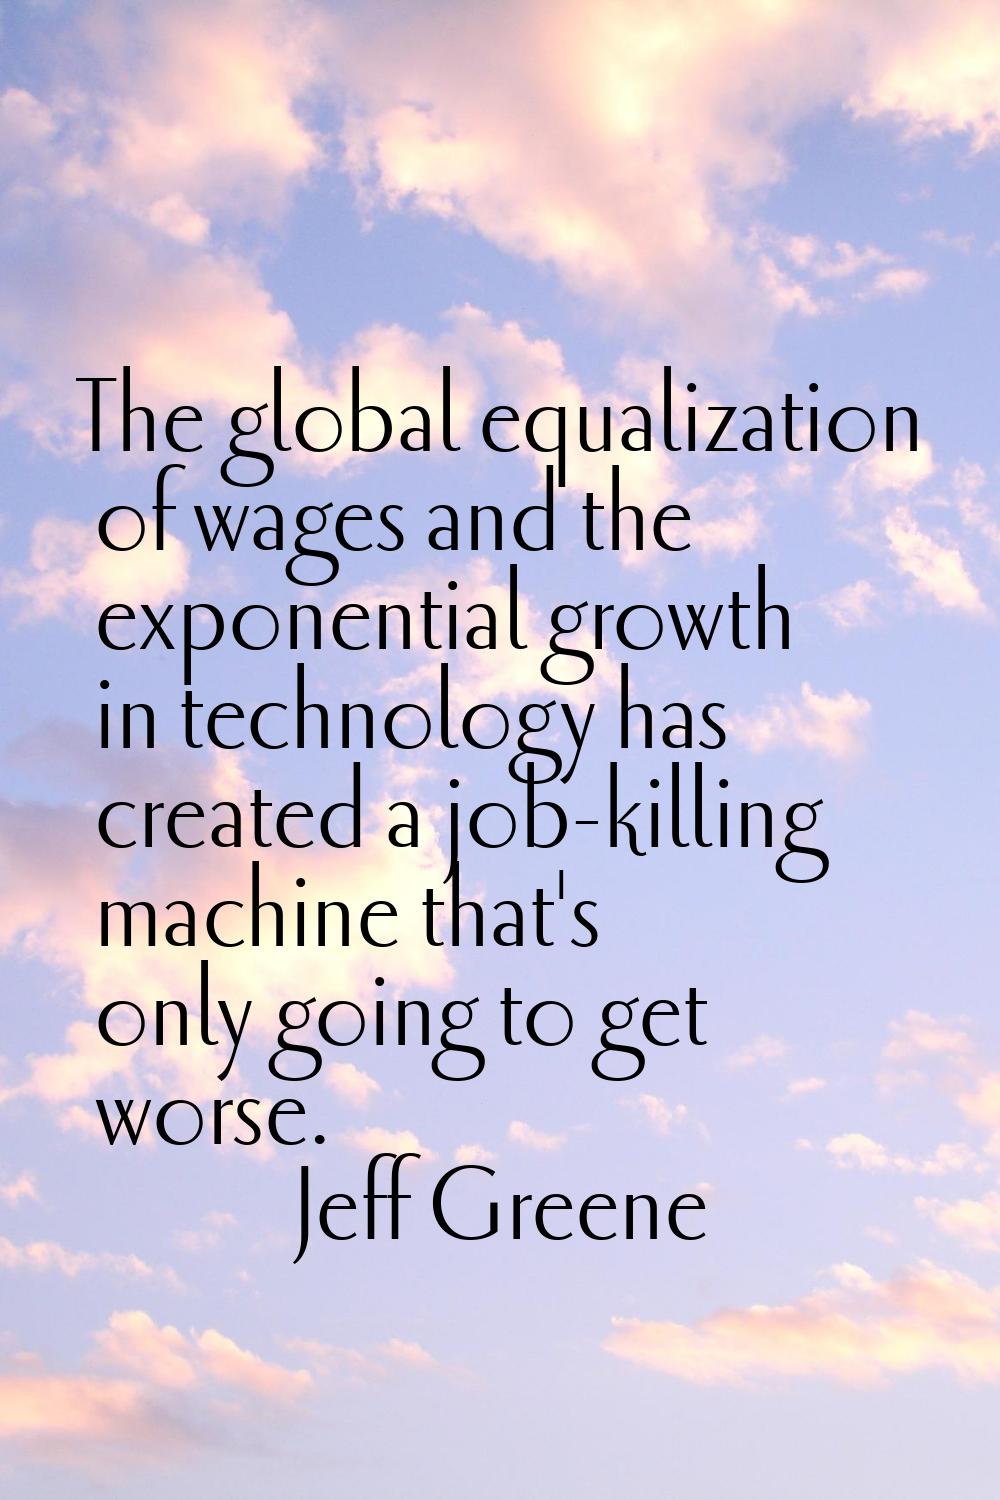 The global equalization of wages and the exponential growth in technology has created a job-killing